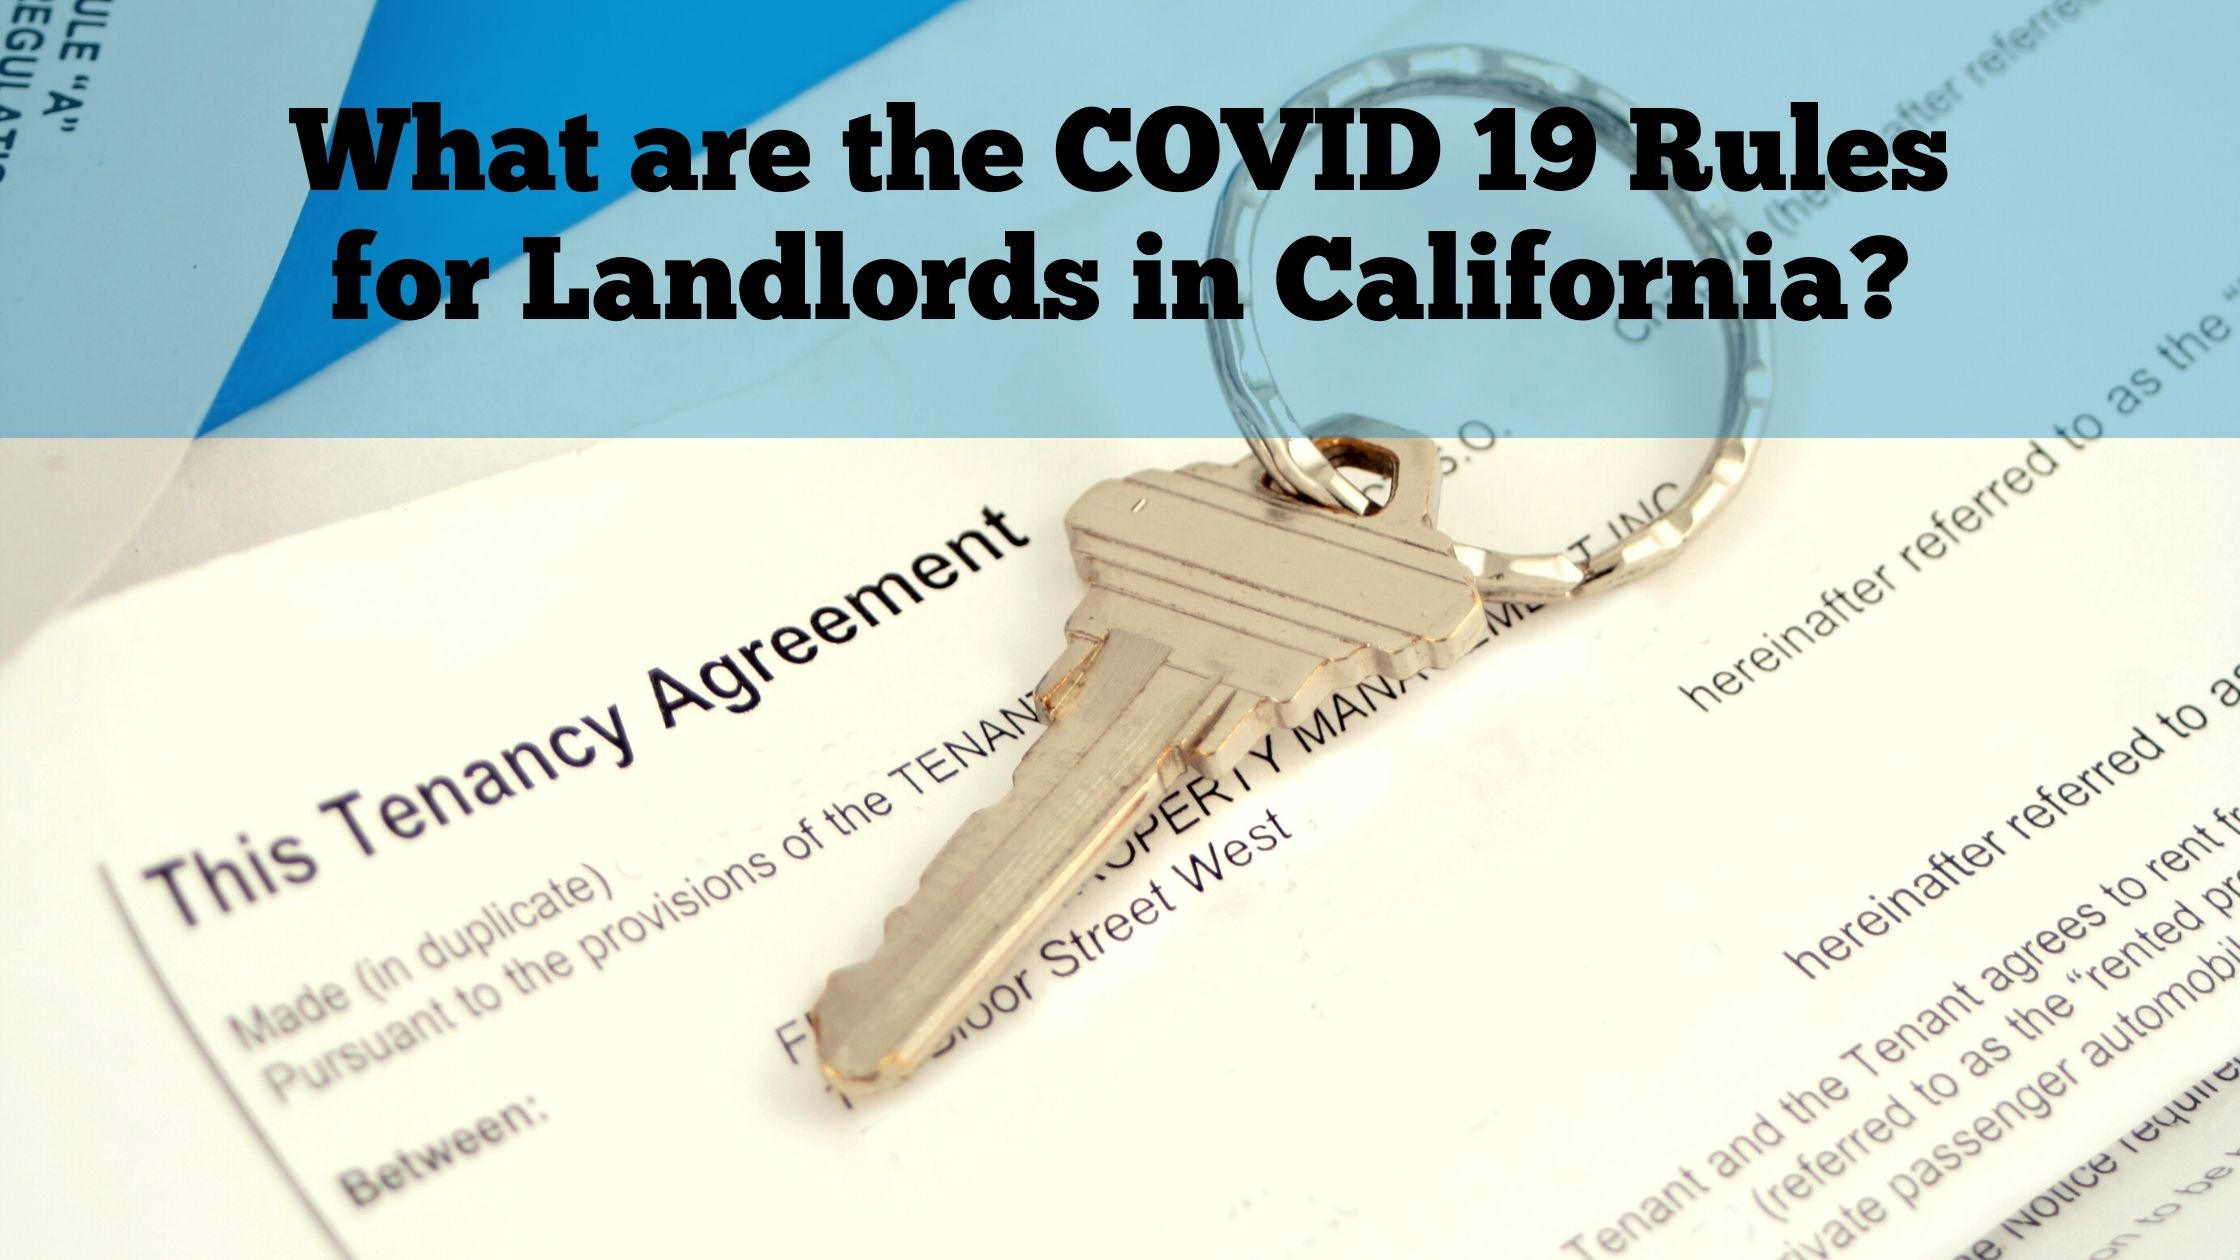 COVID-19, What are the COVID 19 Rules for Landlords in California?